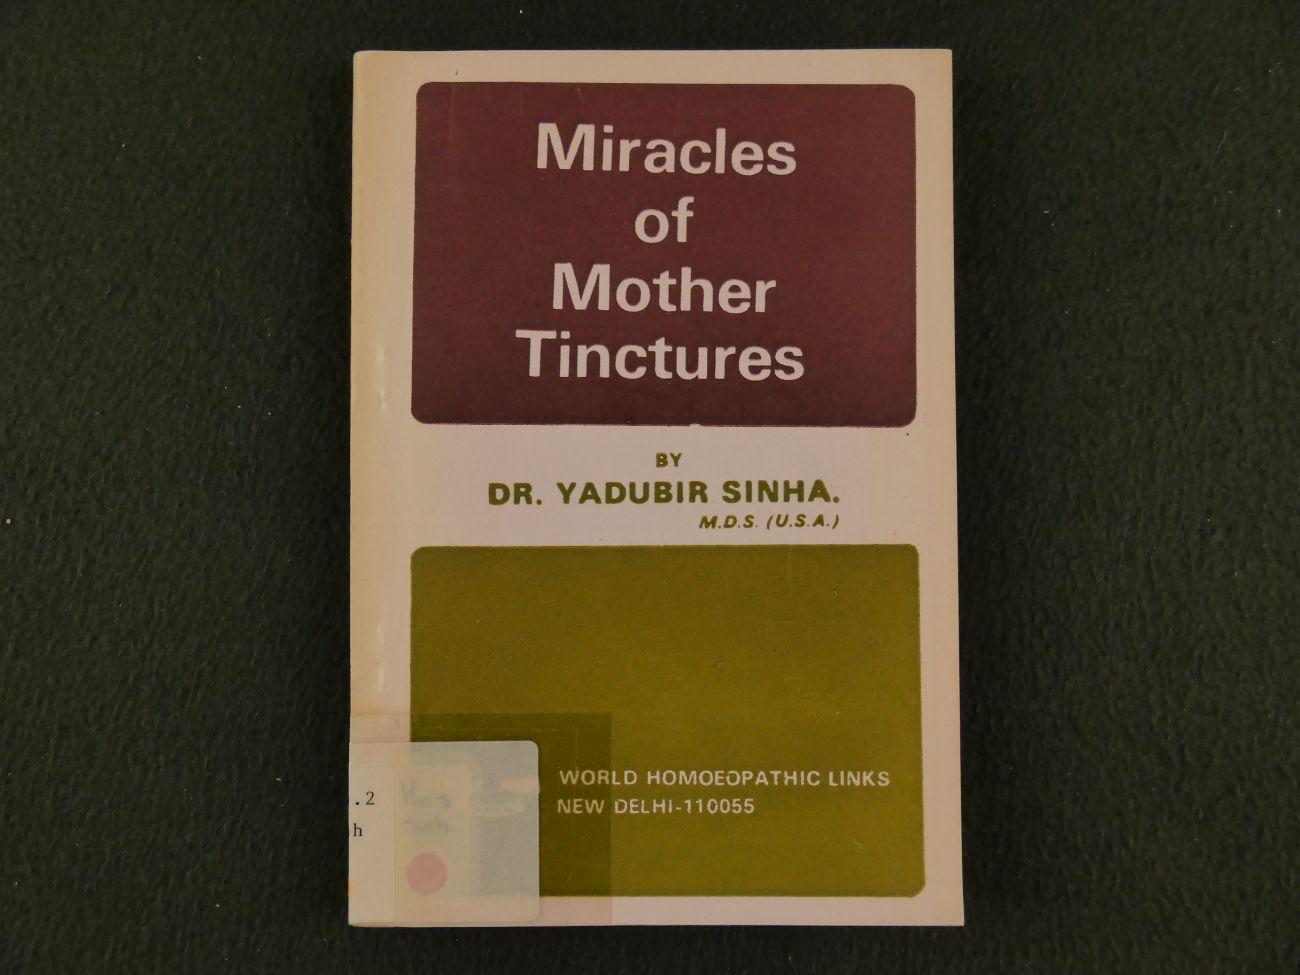 Sinha, Dr.Yadubir - Miracles of Mother Tinctures